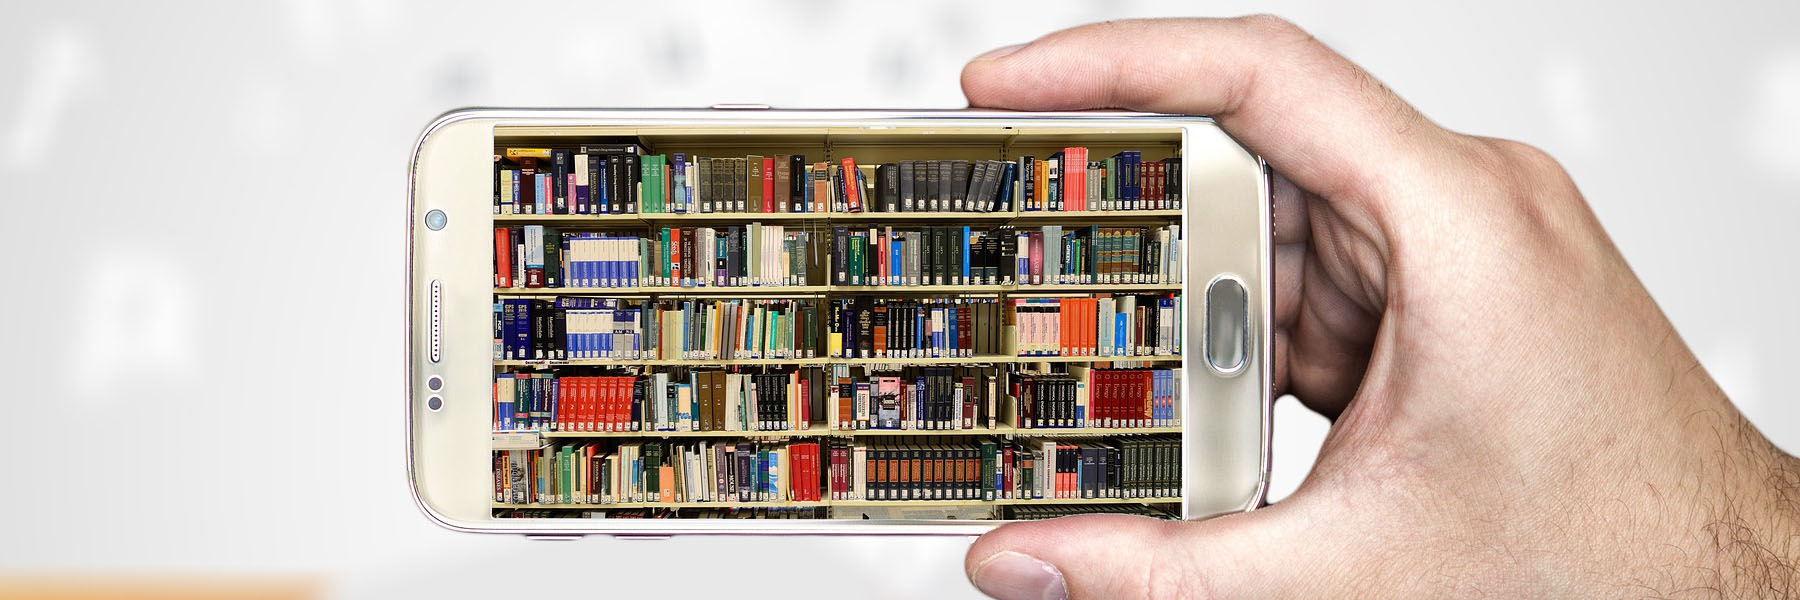 A picture of a bookshelf on a phone.